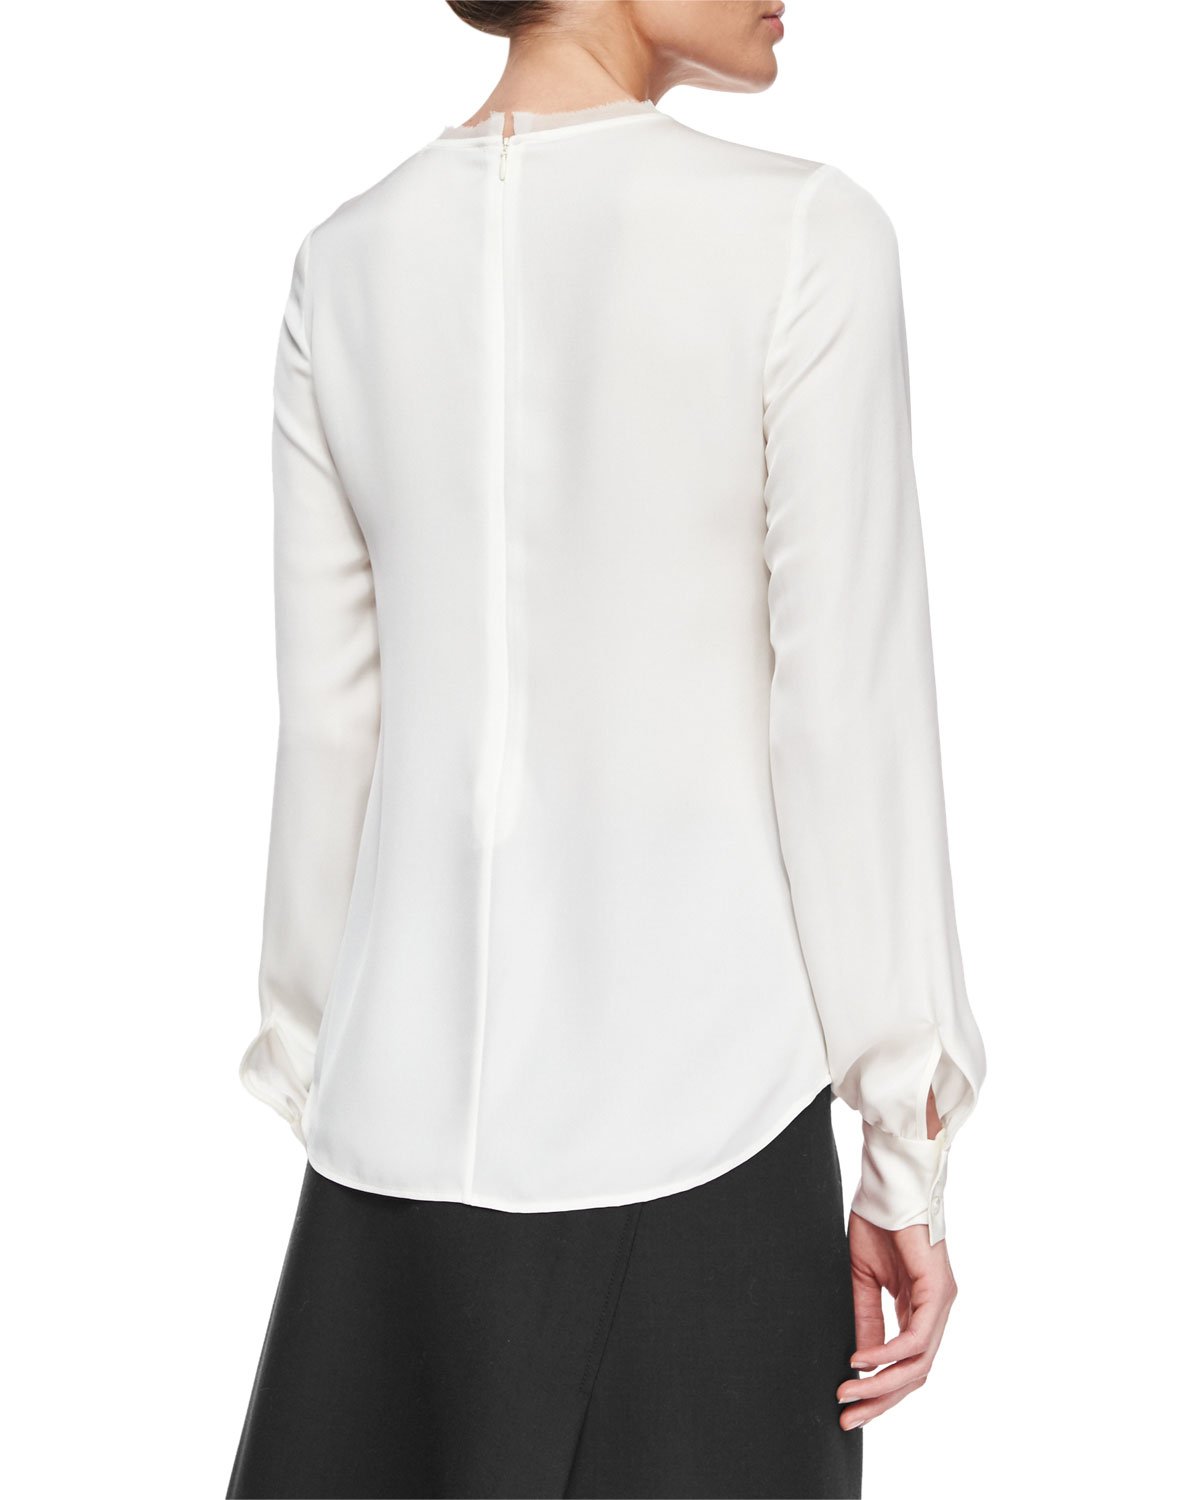 Lyst - Theory Eri Long-sleeve Silk Blouse in White